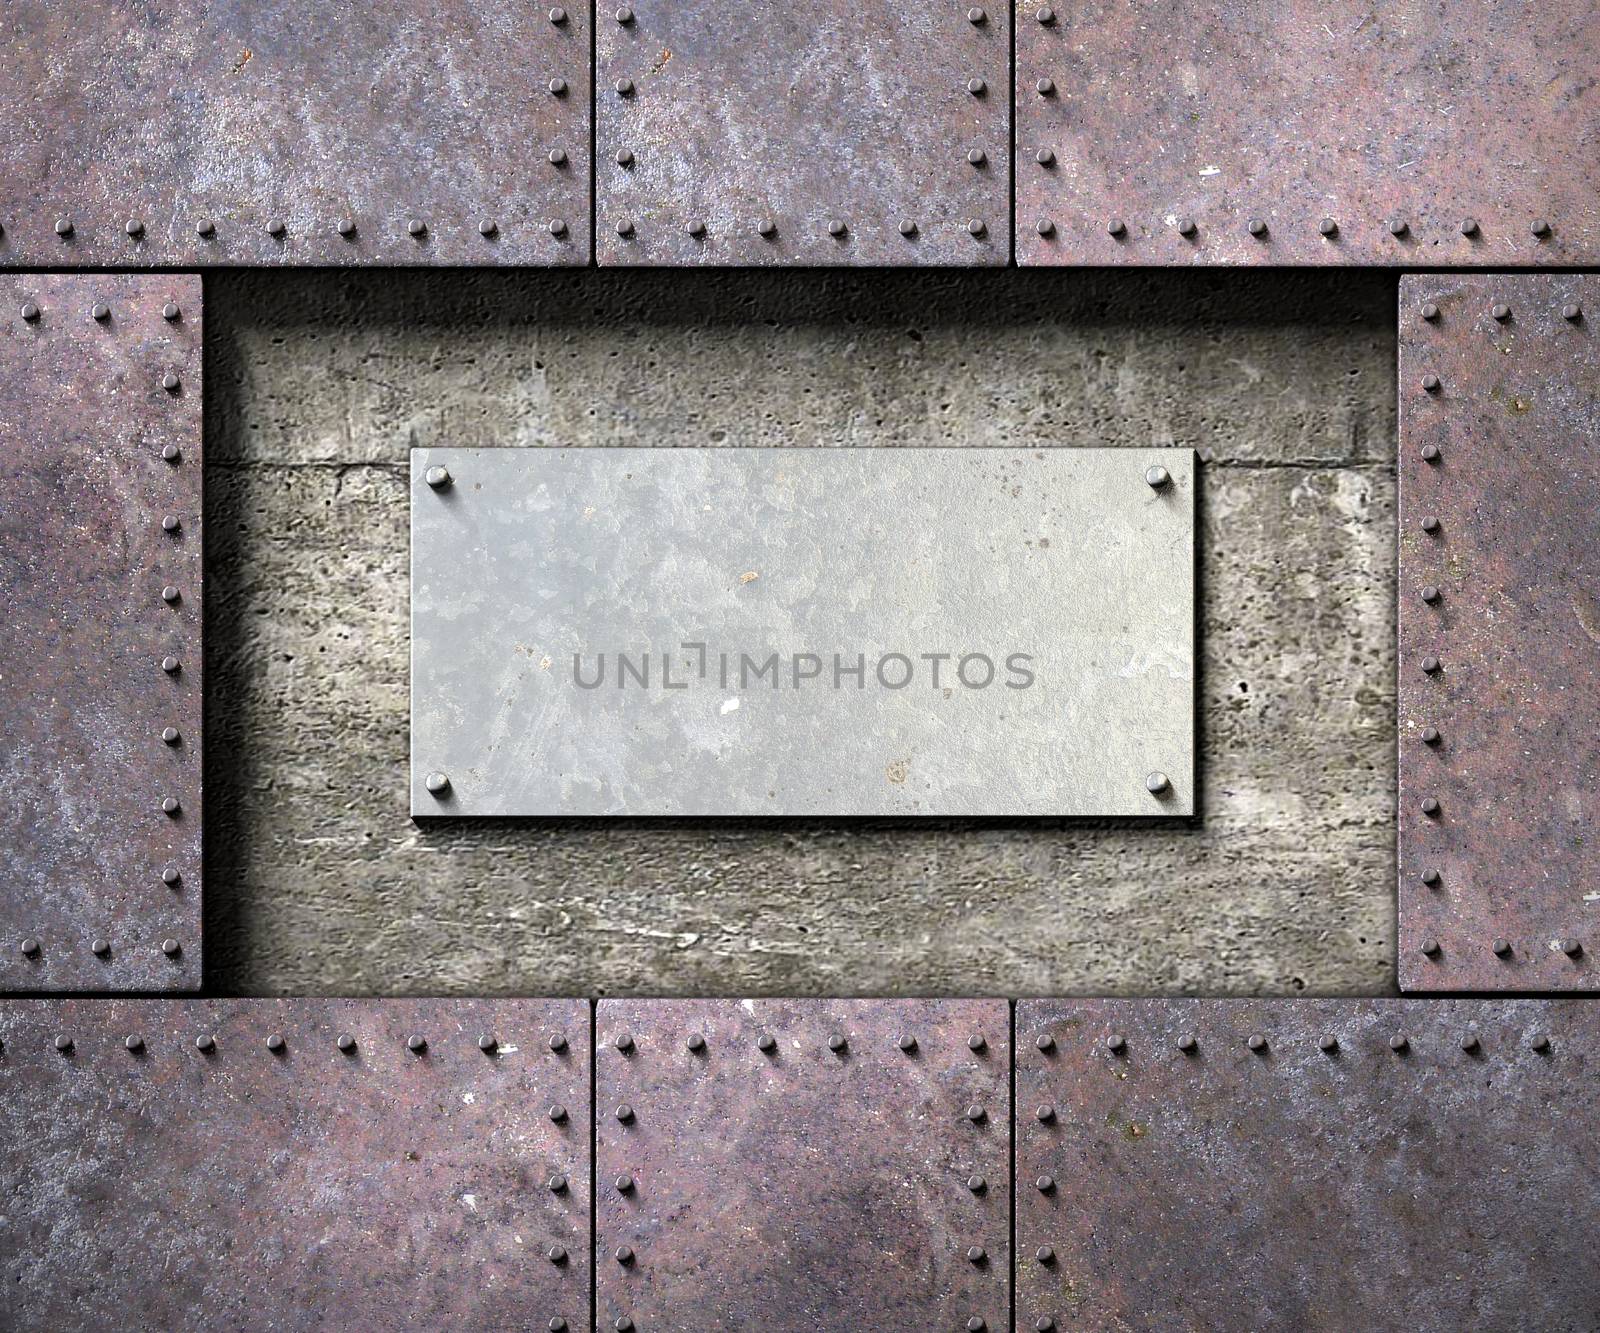 Metal texture with rivets background by dynamicfoto